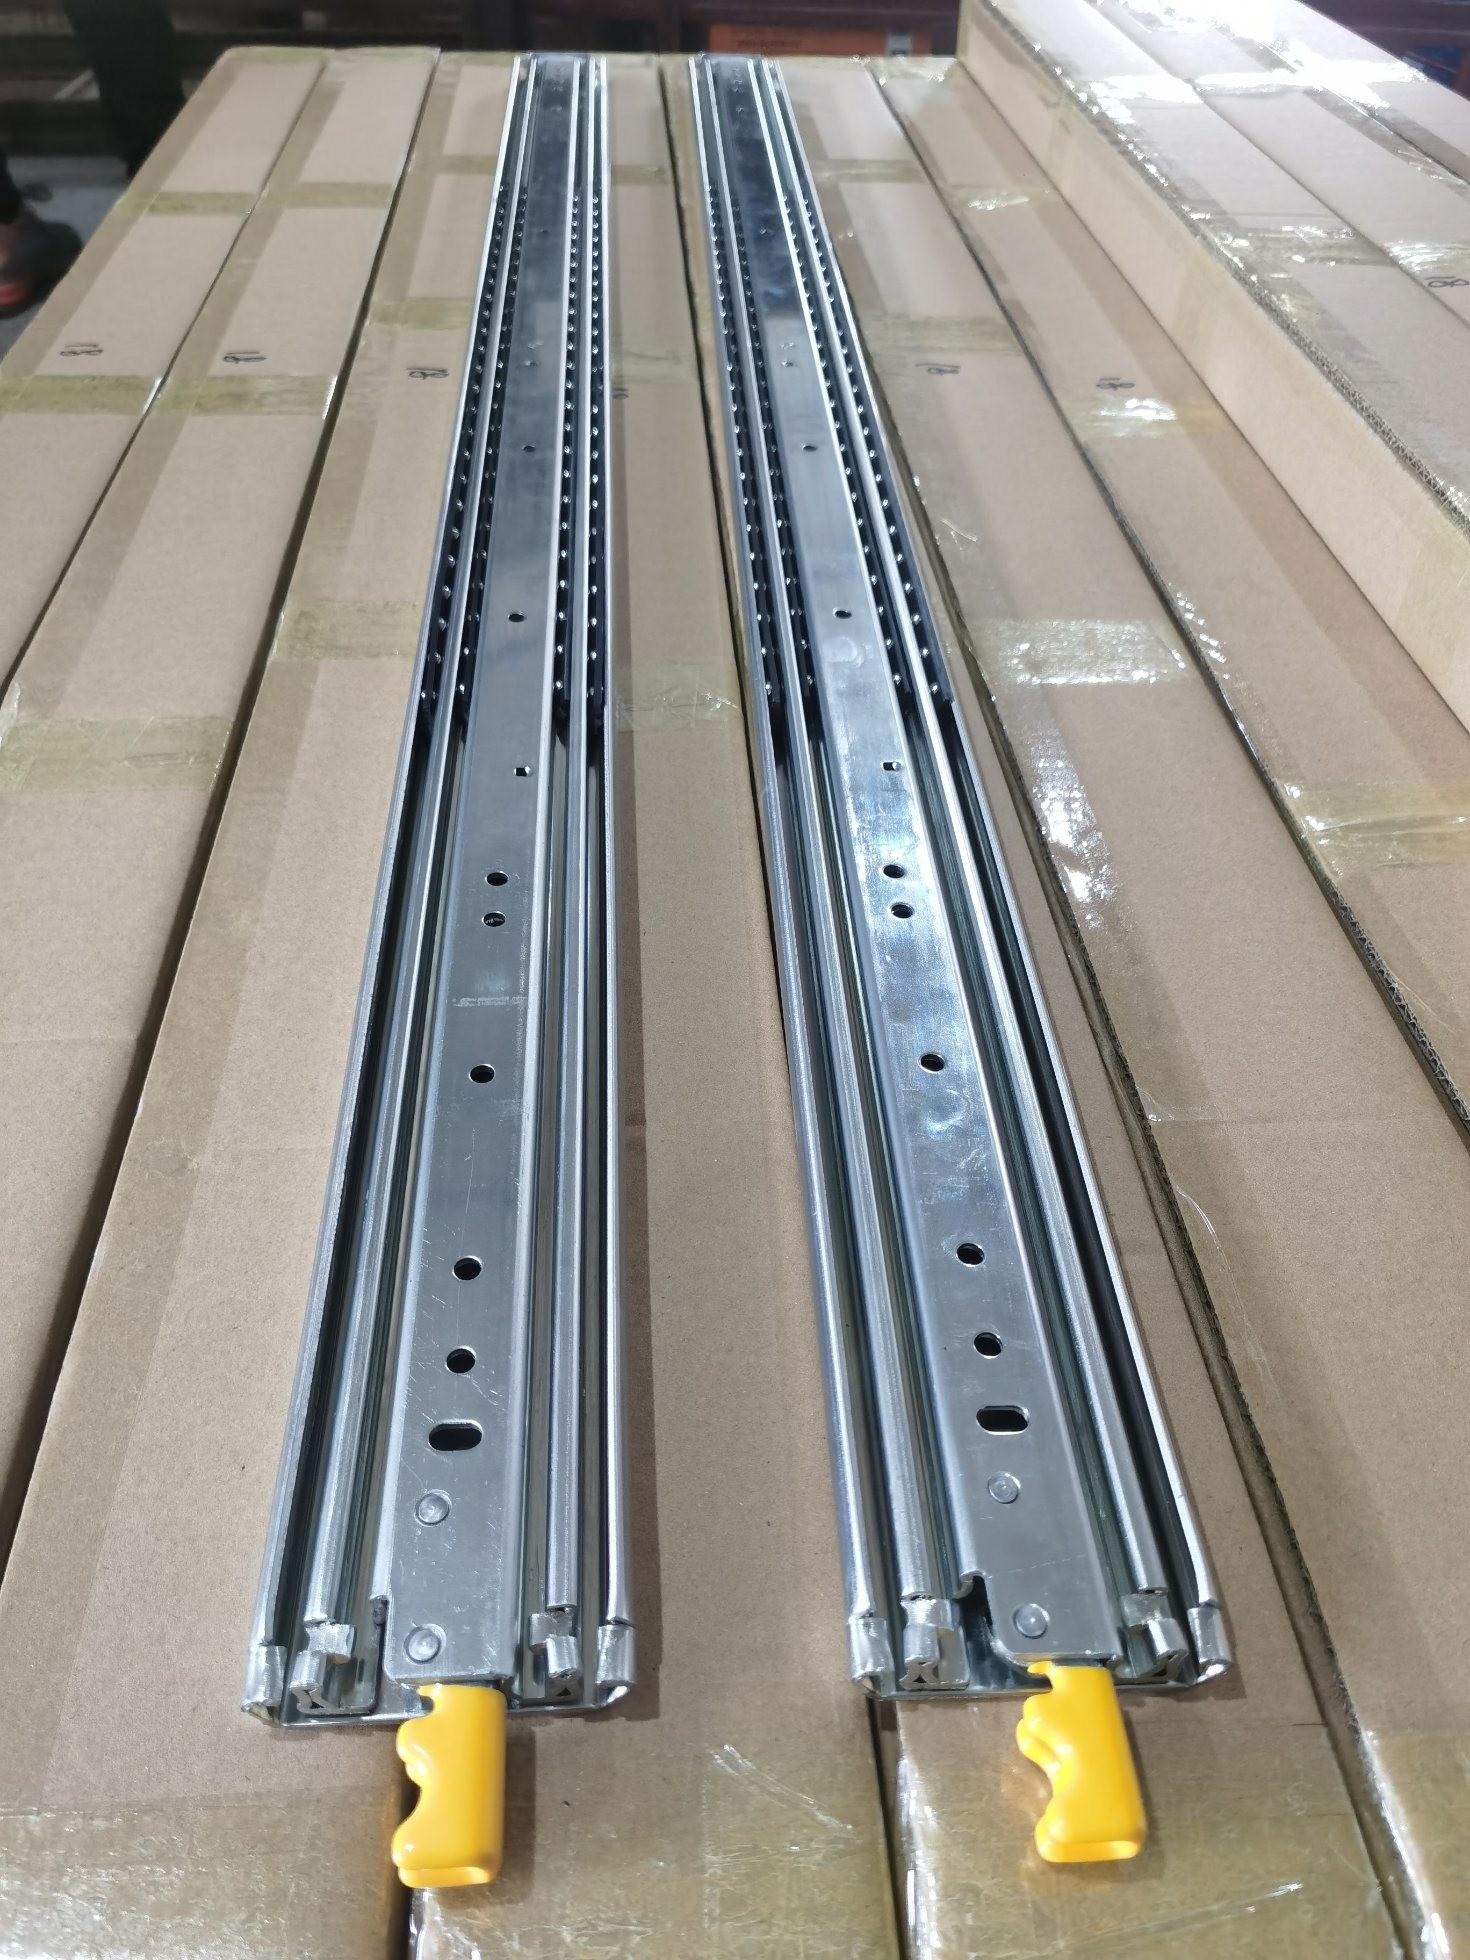 Gefieca 1300mm Length 76mm Width Heavy Duty Ball Bearing Drawer Slide with Lock System for Tooling Box /RV Car Cabinet